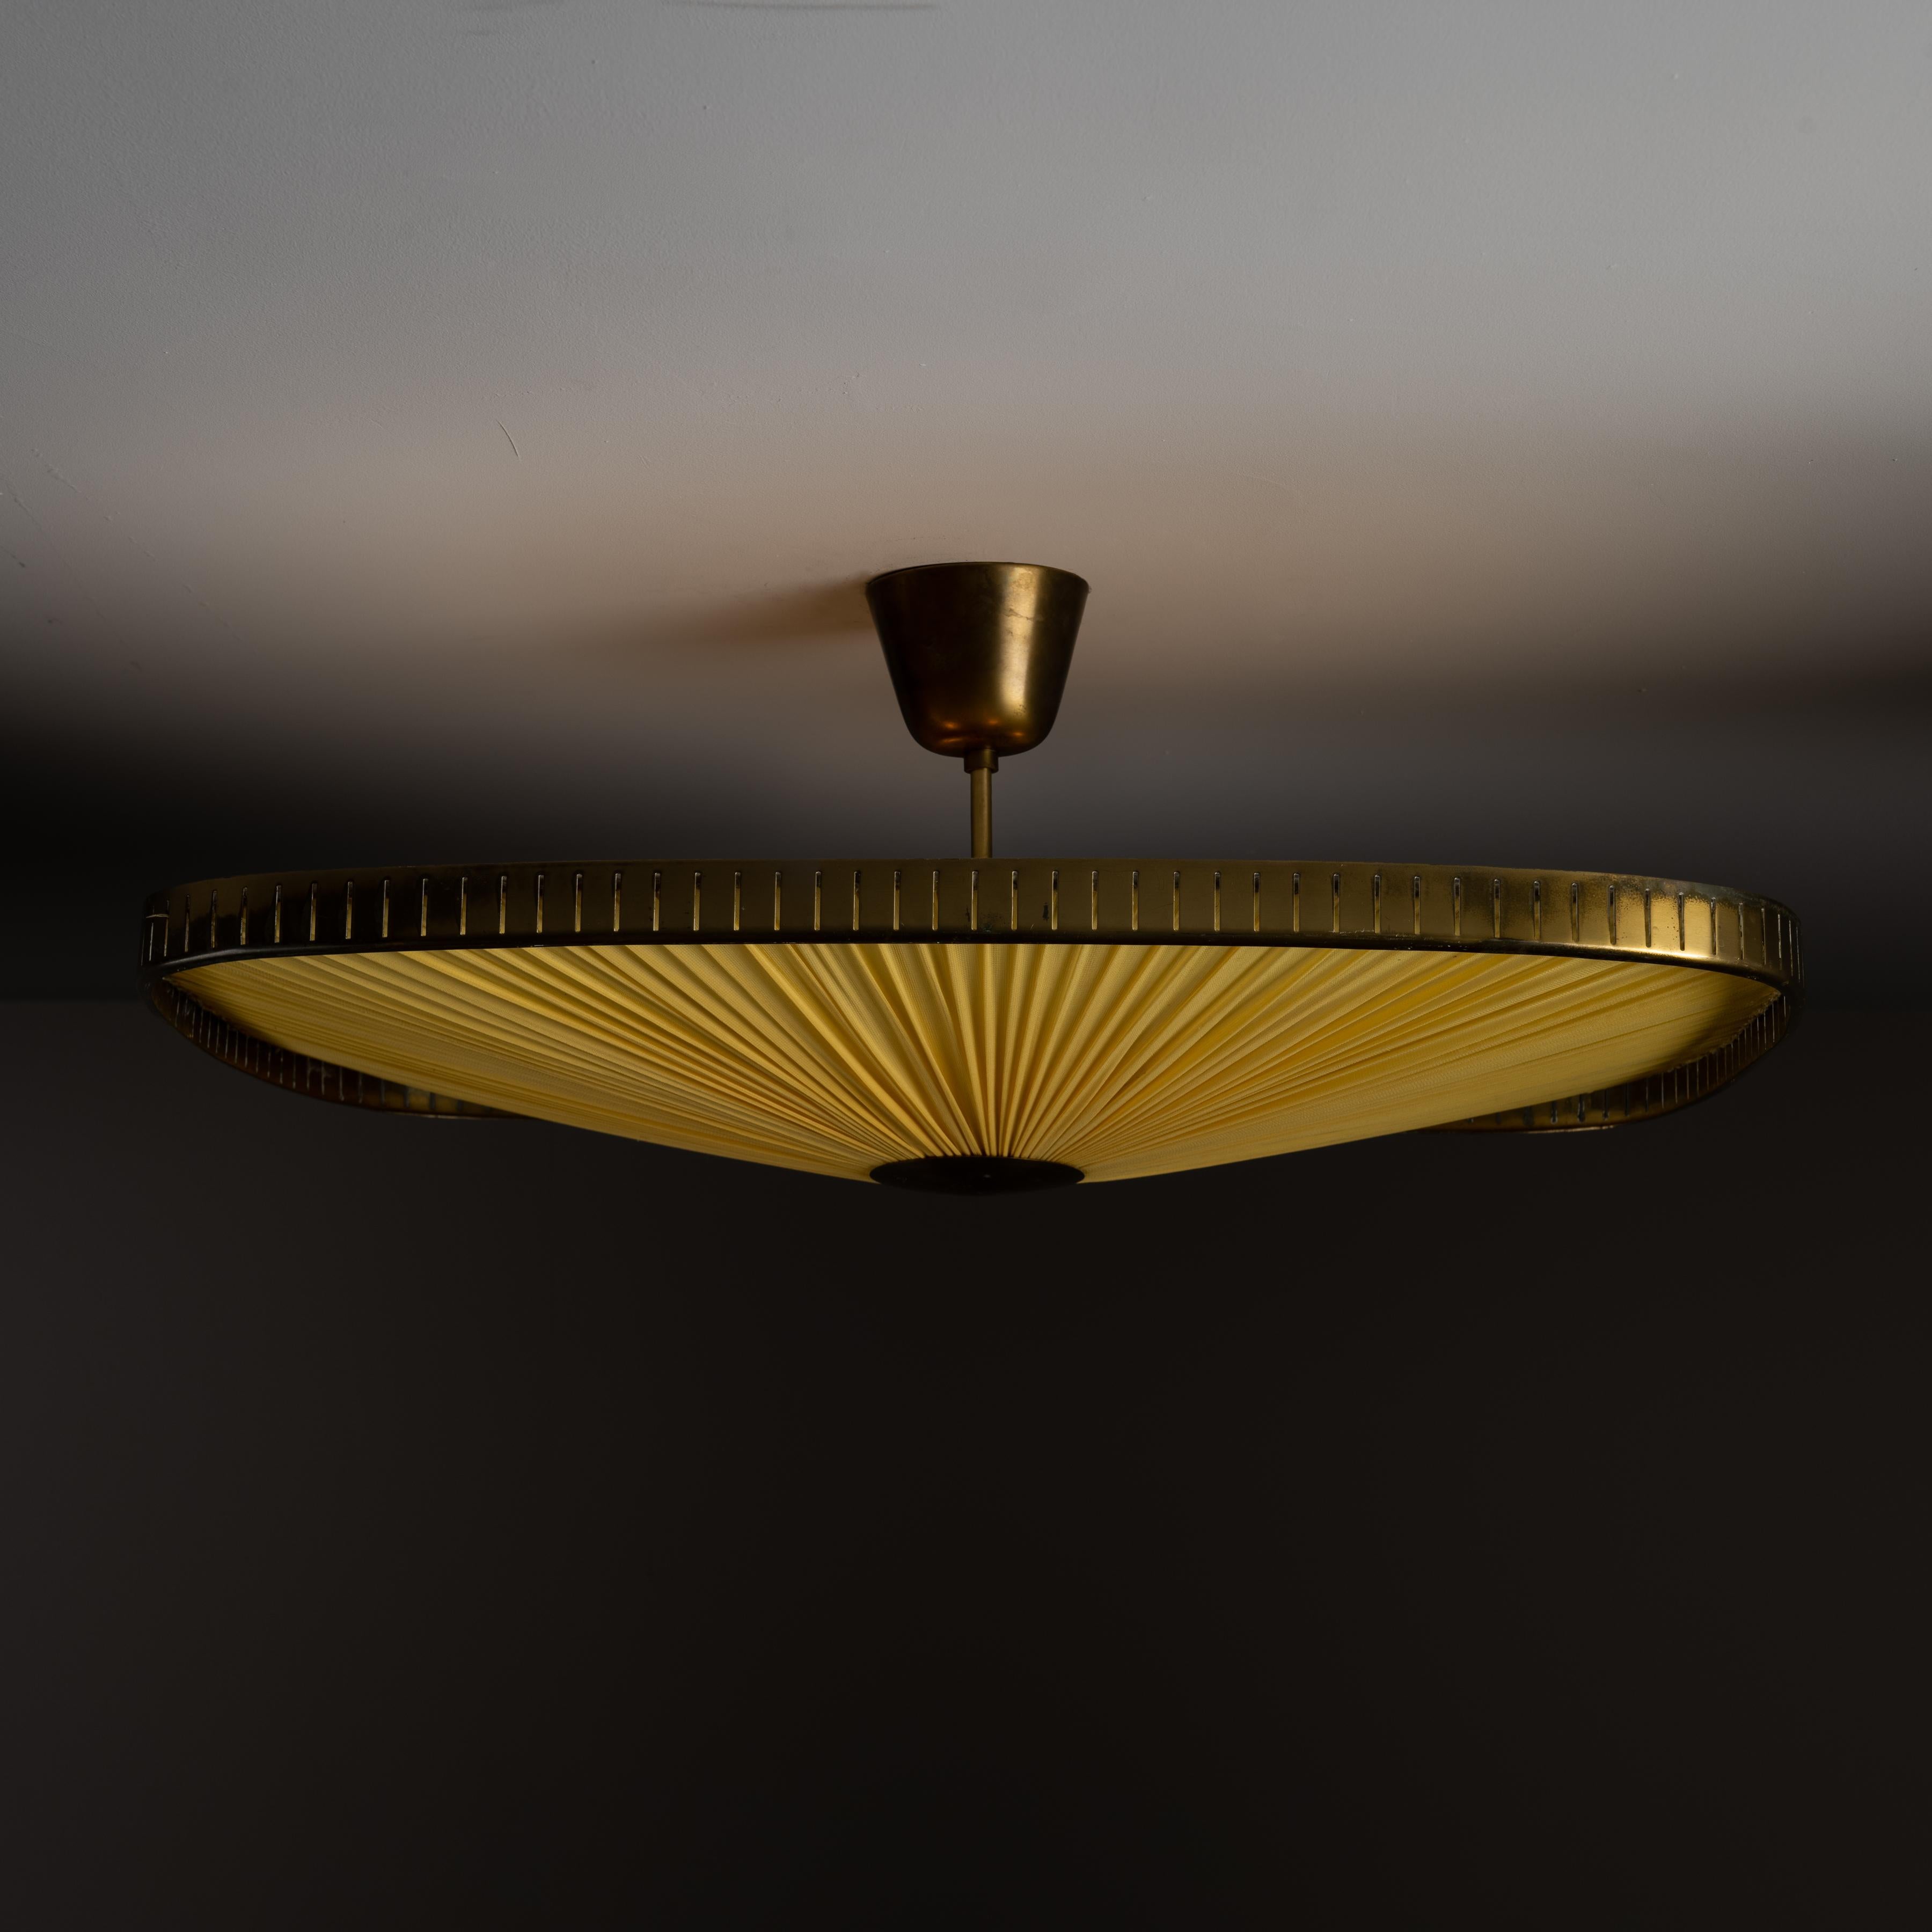 Model 11858 ceiling flush mount by Harald Notini for Arvid Böhlmarks Lampfabrik. Designed and manufactured in Sweden, circa 1950. Softened rectangular frame with an elegant pleated linen inlay. There are some minor holes and tears in the fabric